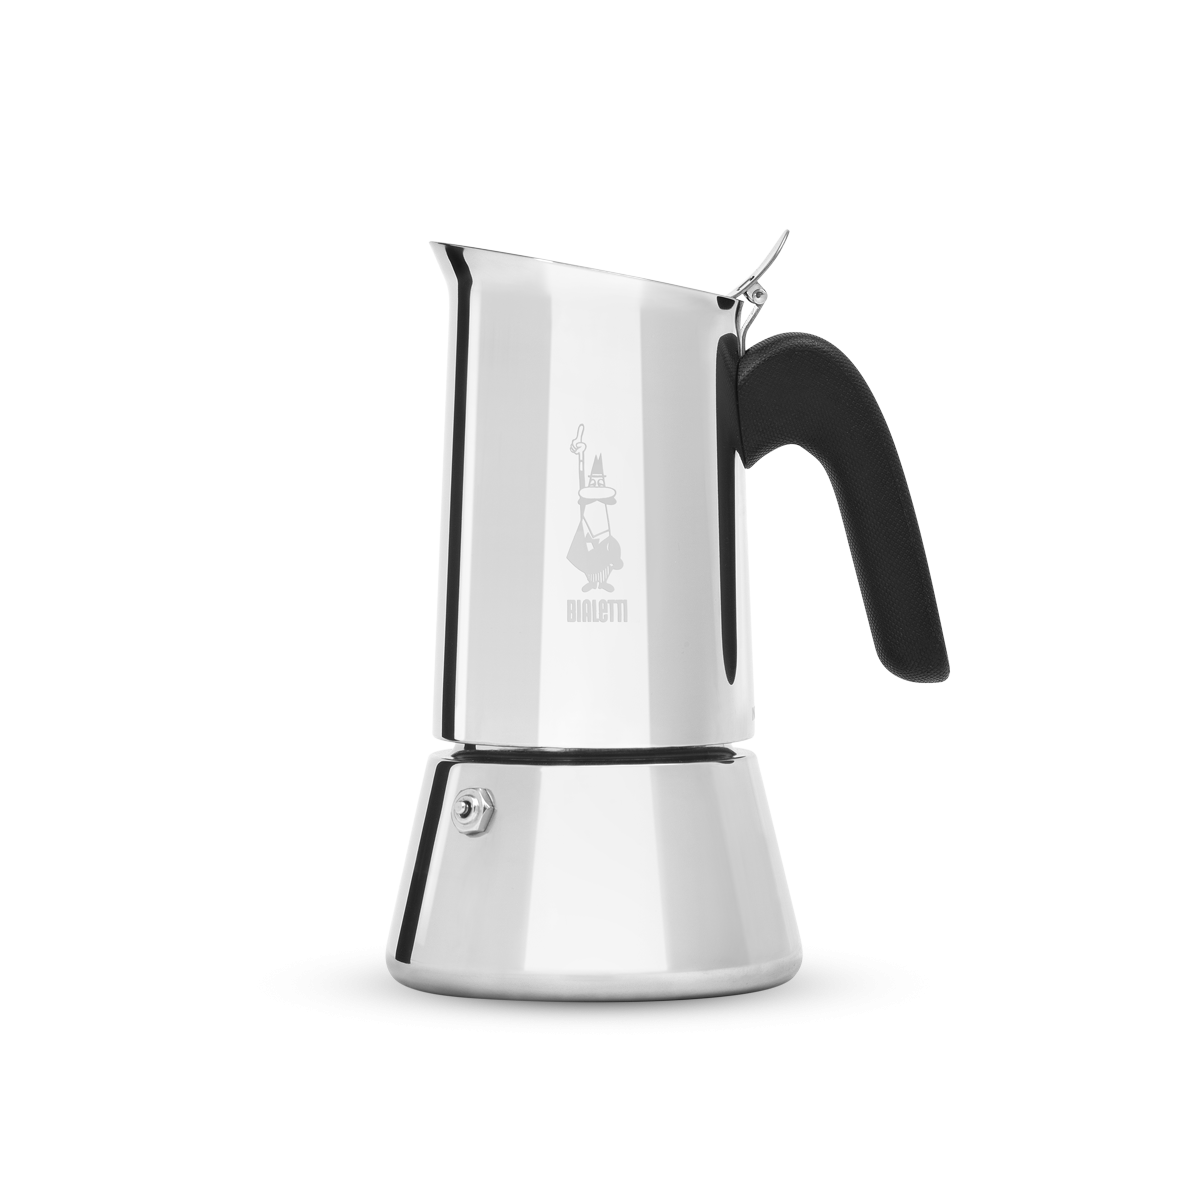 Cafetière italienne Moka induction 3 tasses blanche - Bialetti